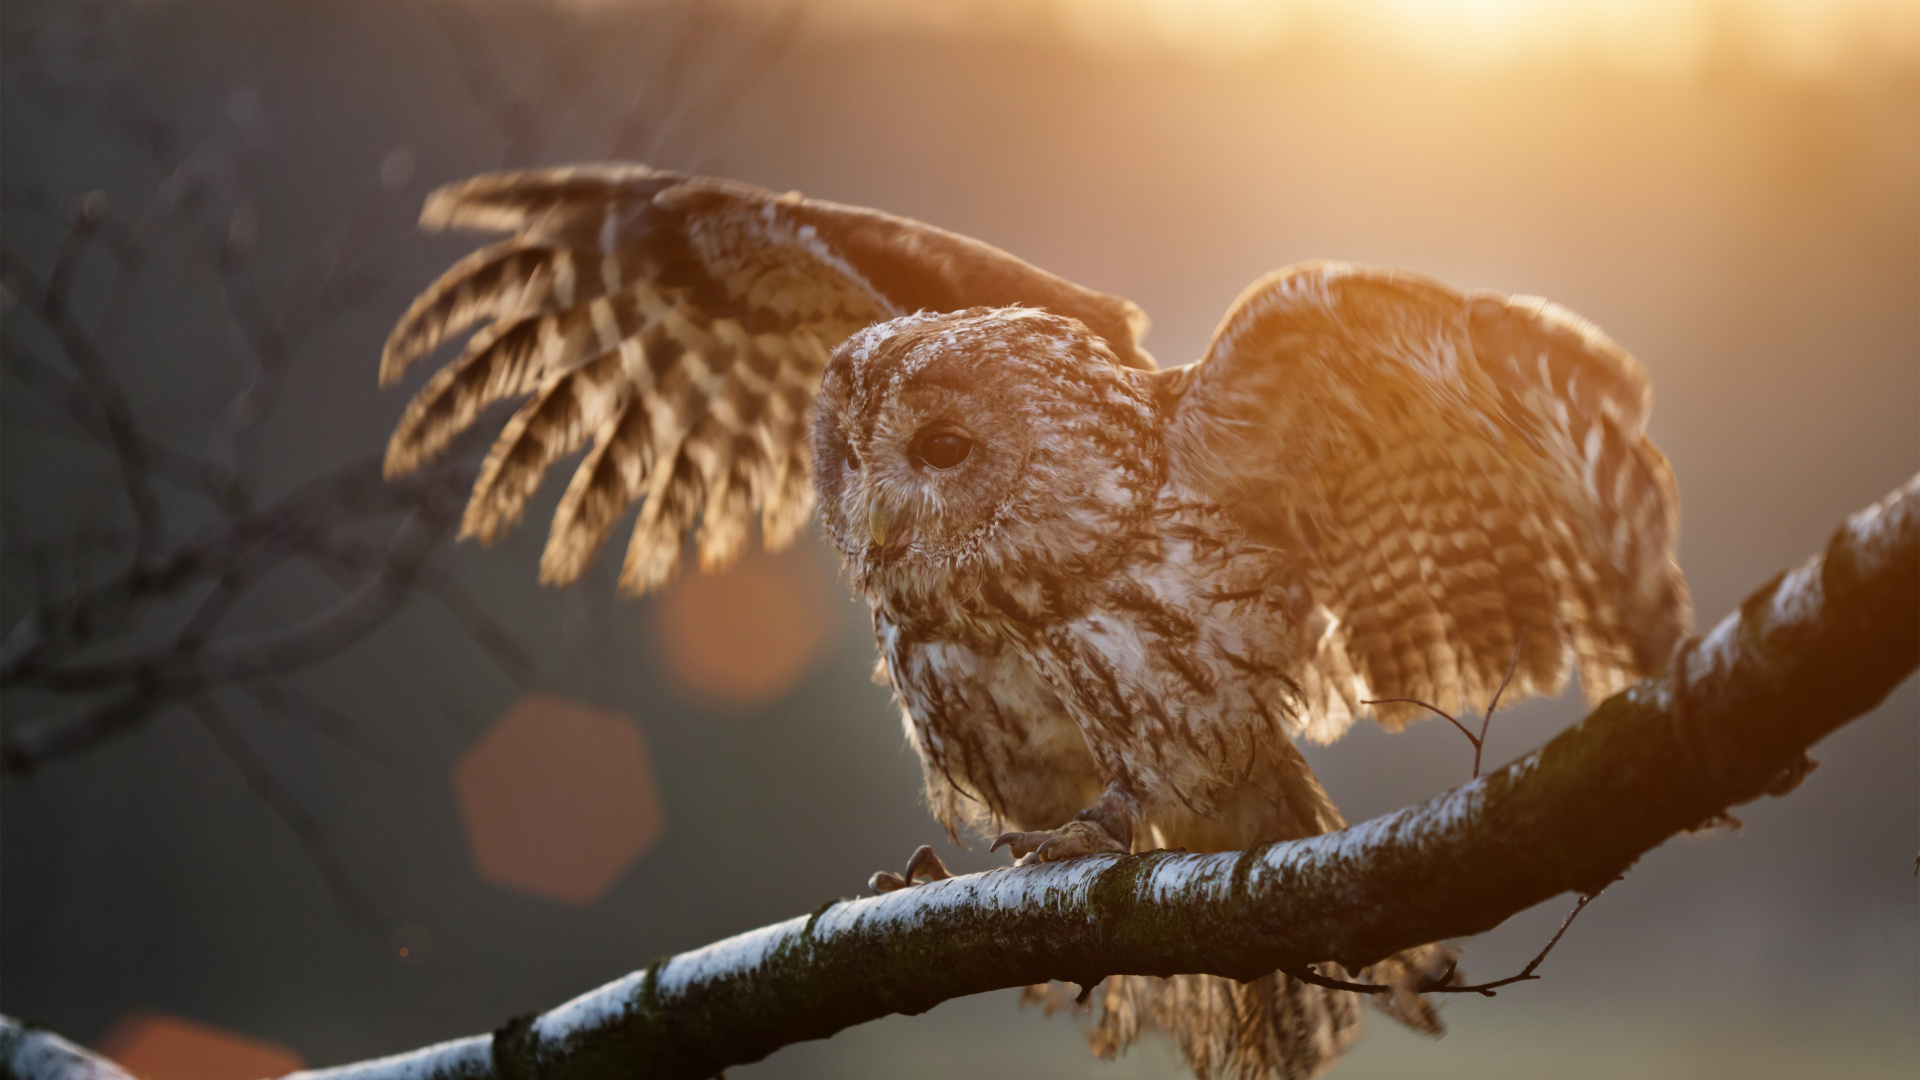 Brown Owl Perched on Brown Tree Branch During Daytime. Wallpaper in 1920x1080 Resolution